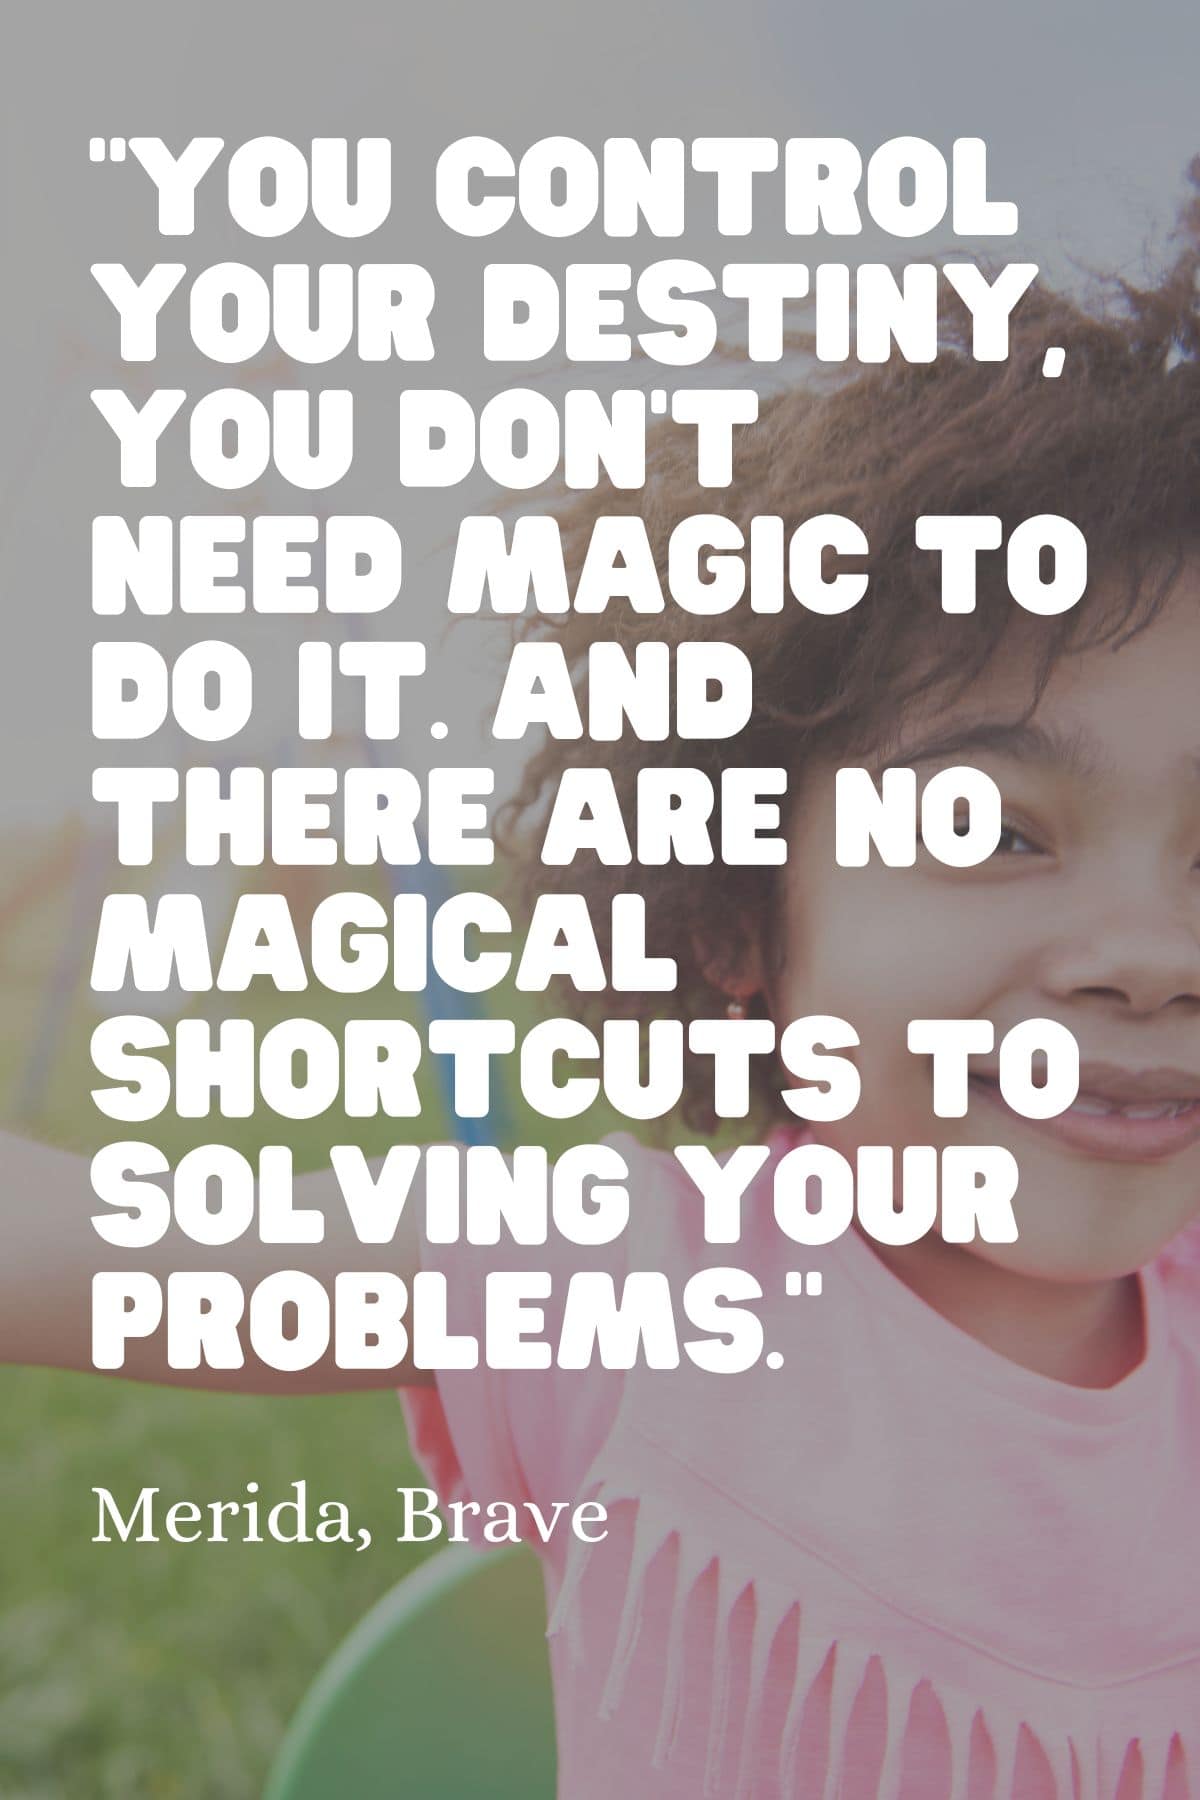 “You control your destiny, you don’t need magic to do it. And there are no magical shortcuts to solving your problems.” – Merida, Brave Kids mindfulness quote